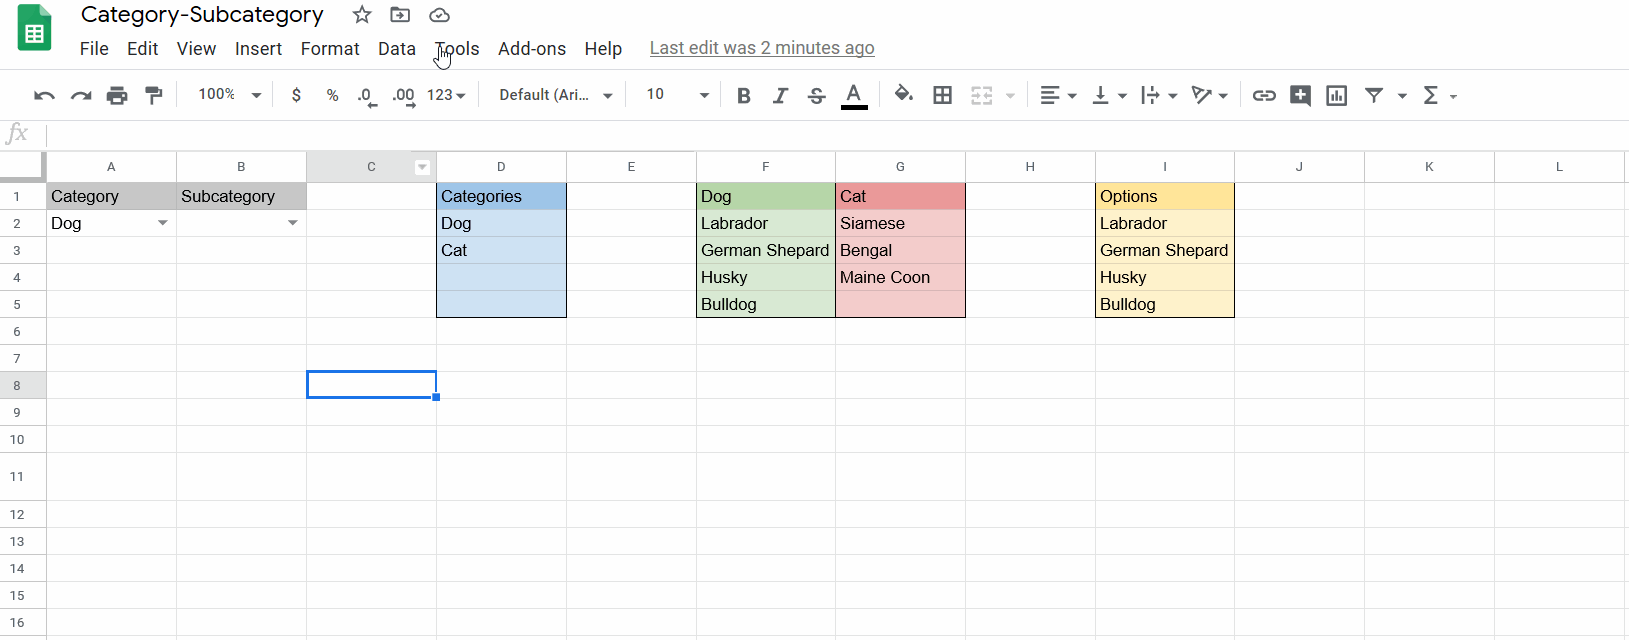 Subcategories In Google Sheets • Casual Inferences